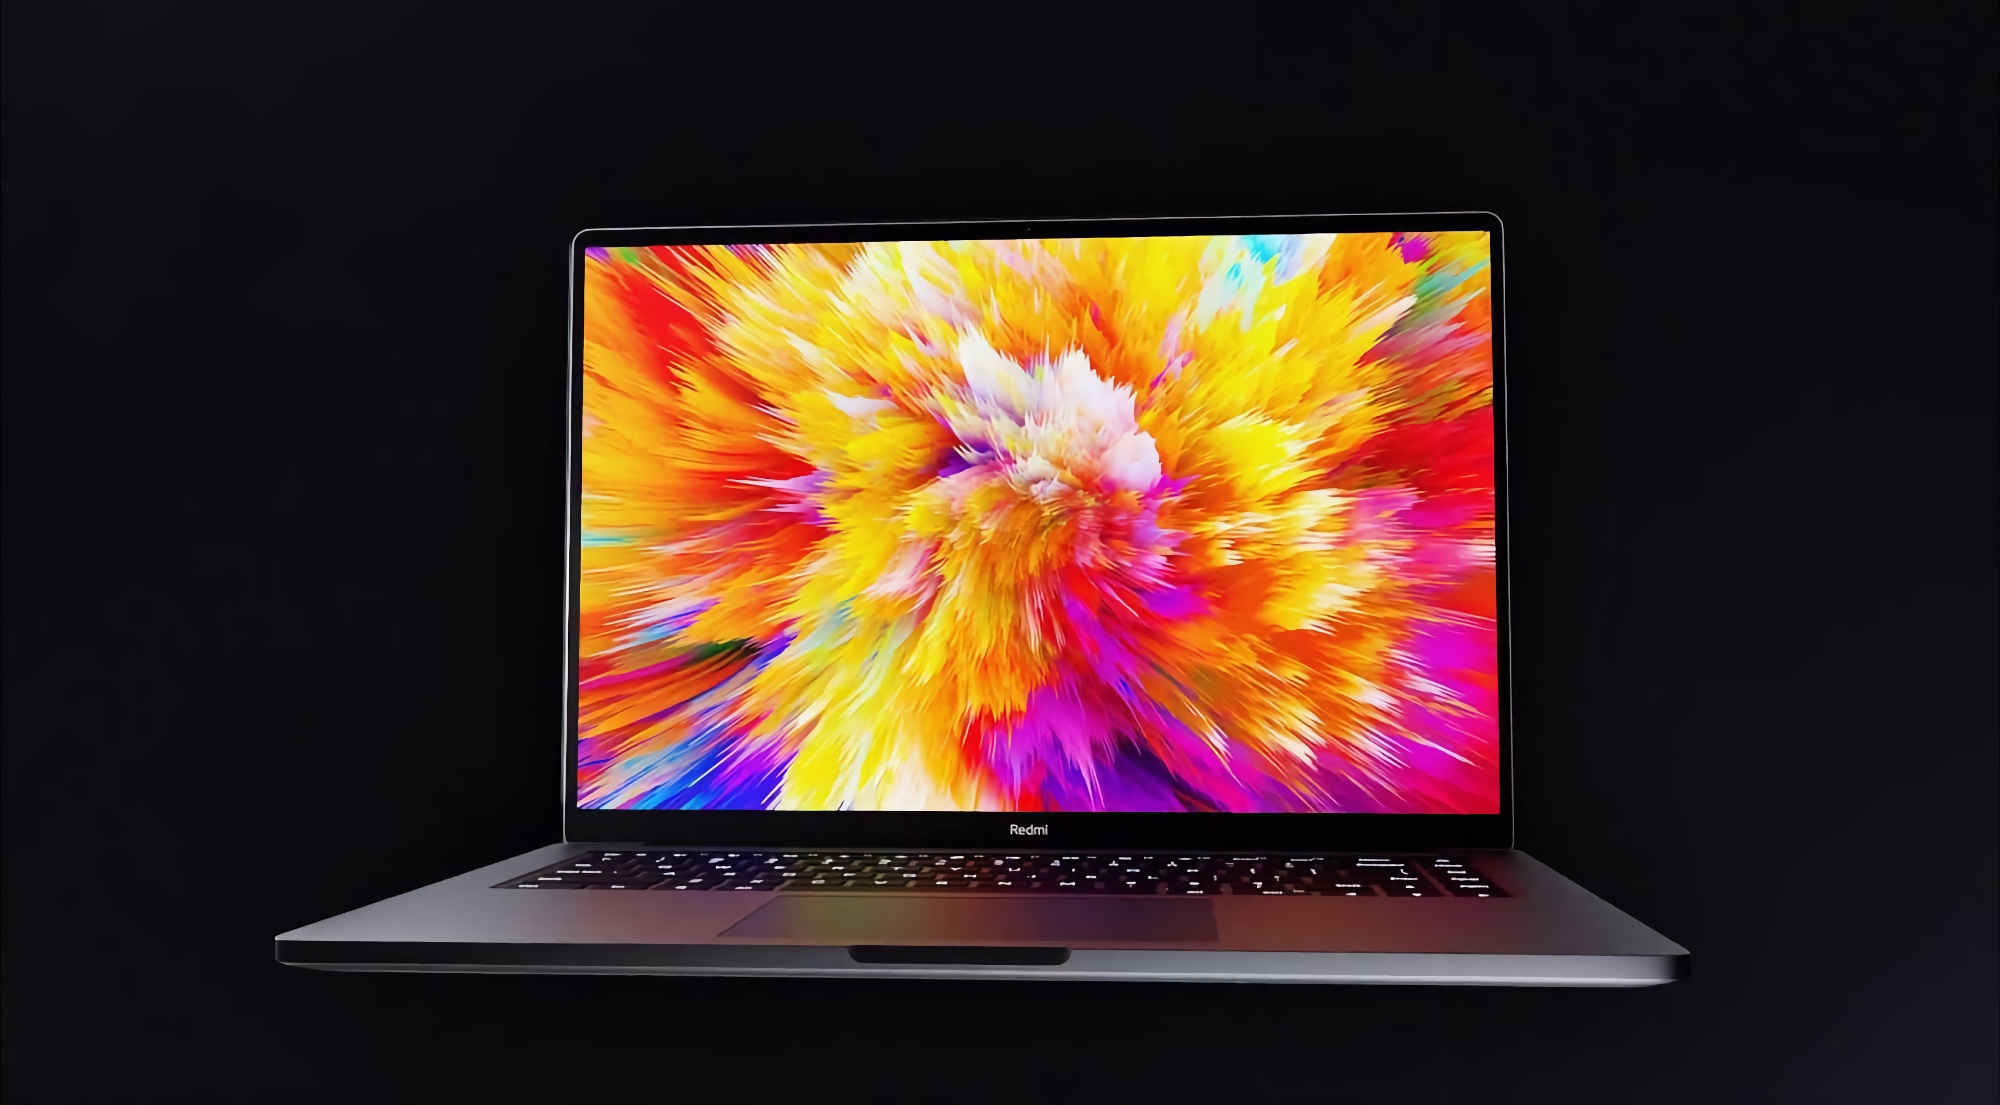 90 Hz display, 11th generation Intel chips and Nvidia GeForce MX450 graphics card: specifications of new Xiaomi Mi Notebook leaked online